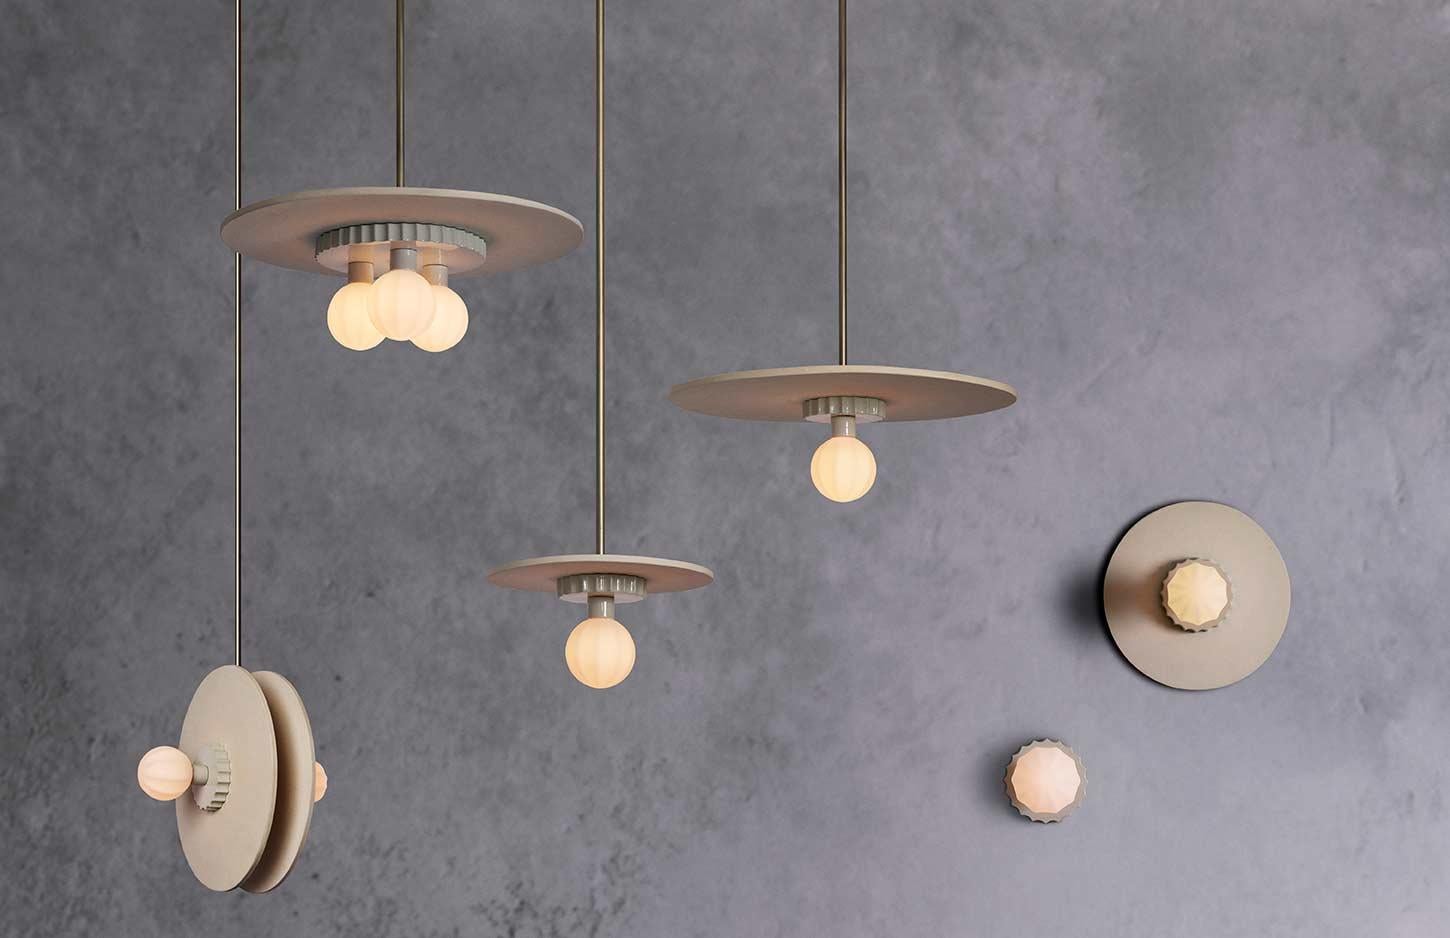 This family of lights are composed of hand-blown ridged glass, a scalloped glaze puck, and topped off with a large unglazed ceramic disc. The difference in texture between the elements are picked up beautifully by the light

Lamping: 1 G9 bulb,